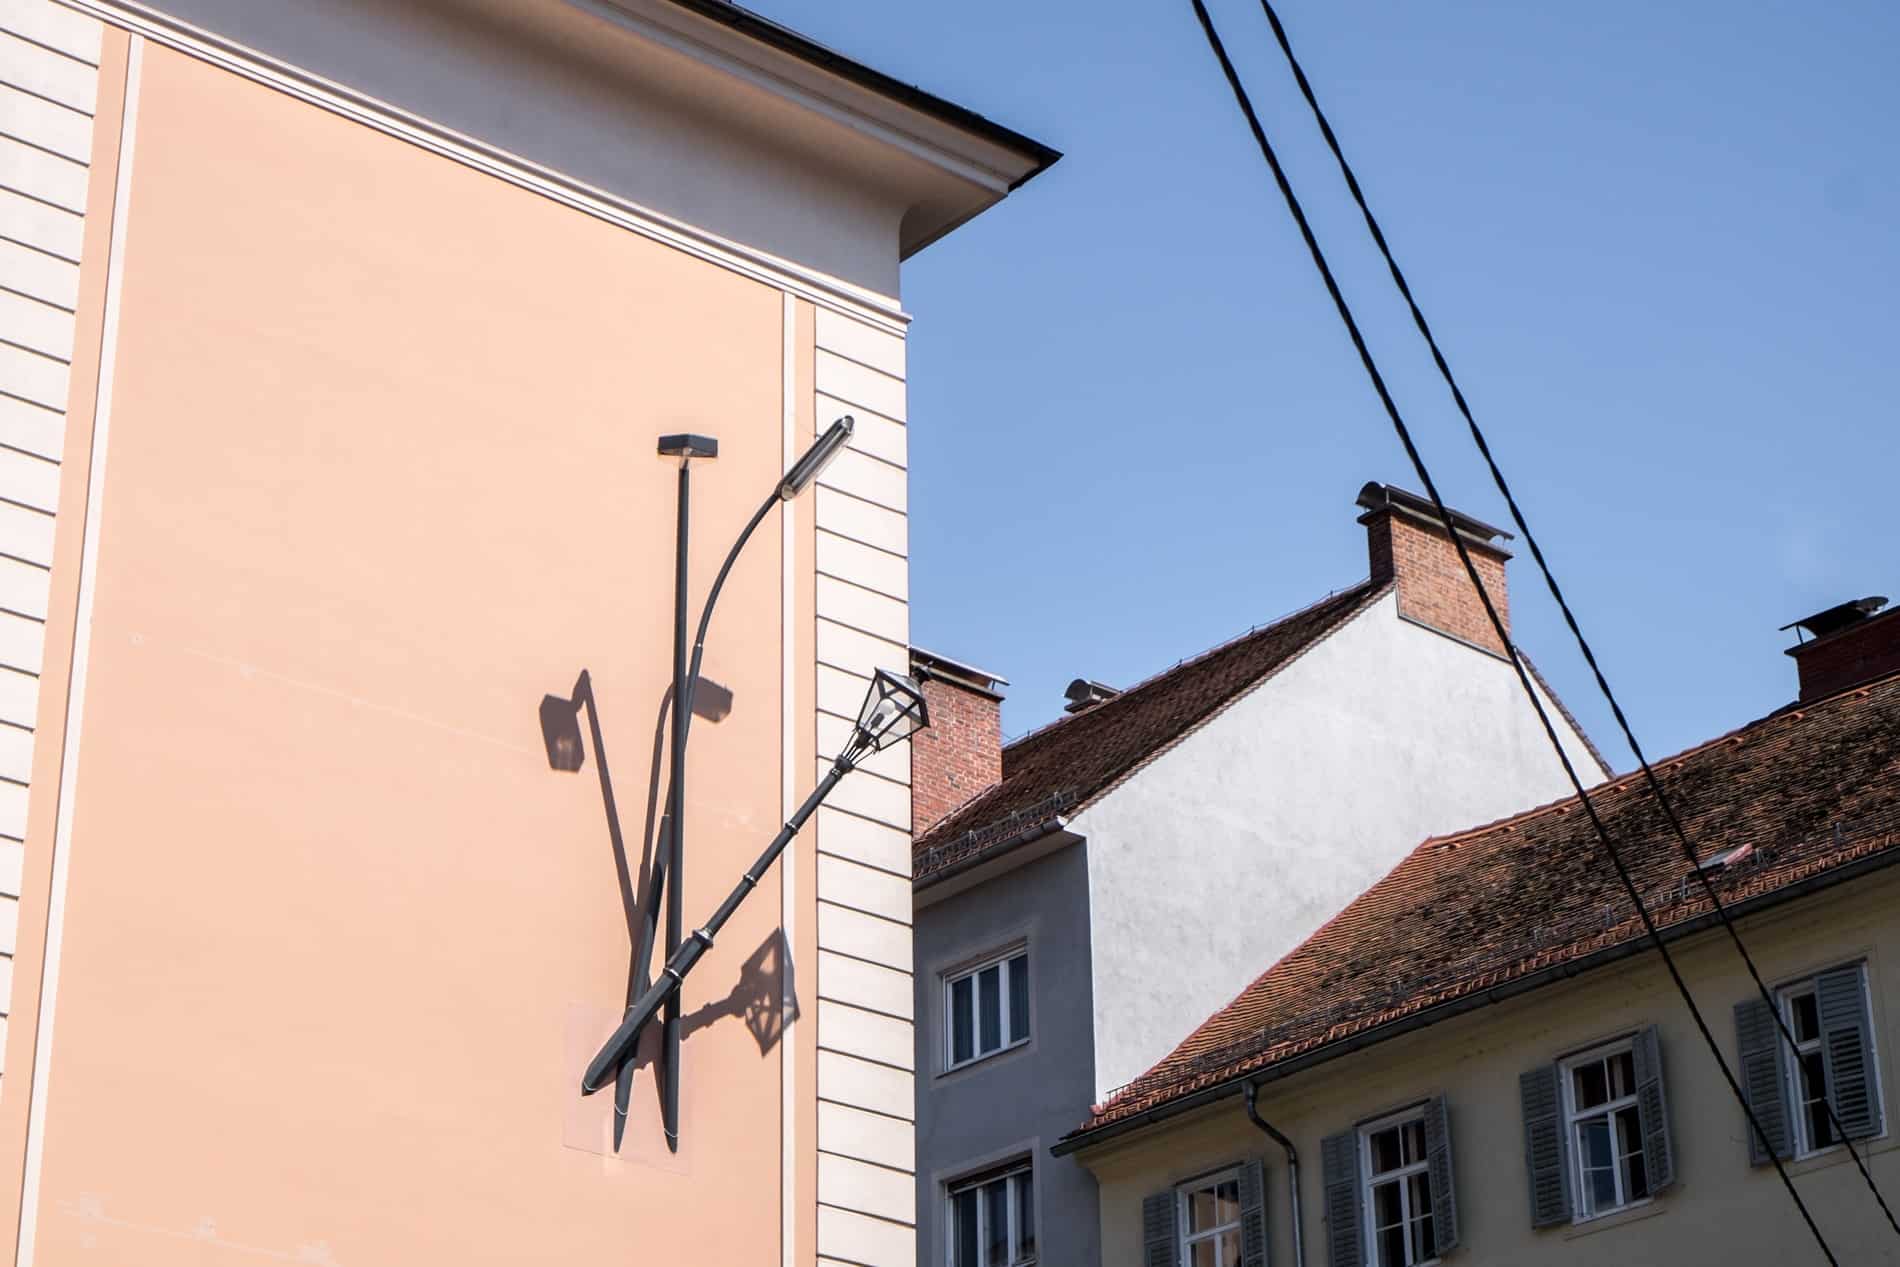 Public artwork of lampshades sticking out of the side of a building wall in Graz